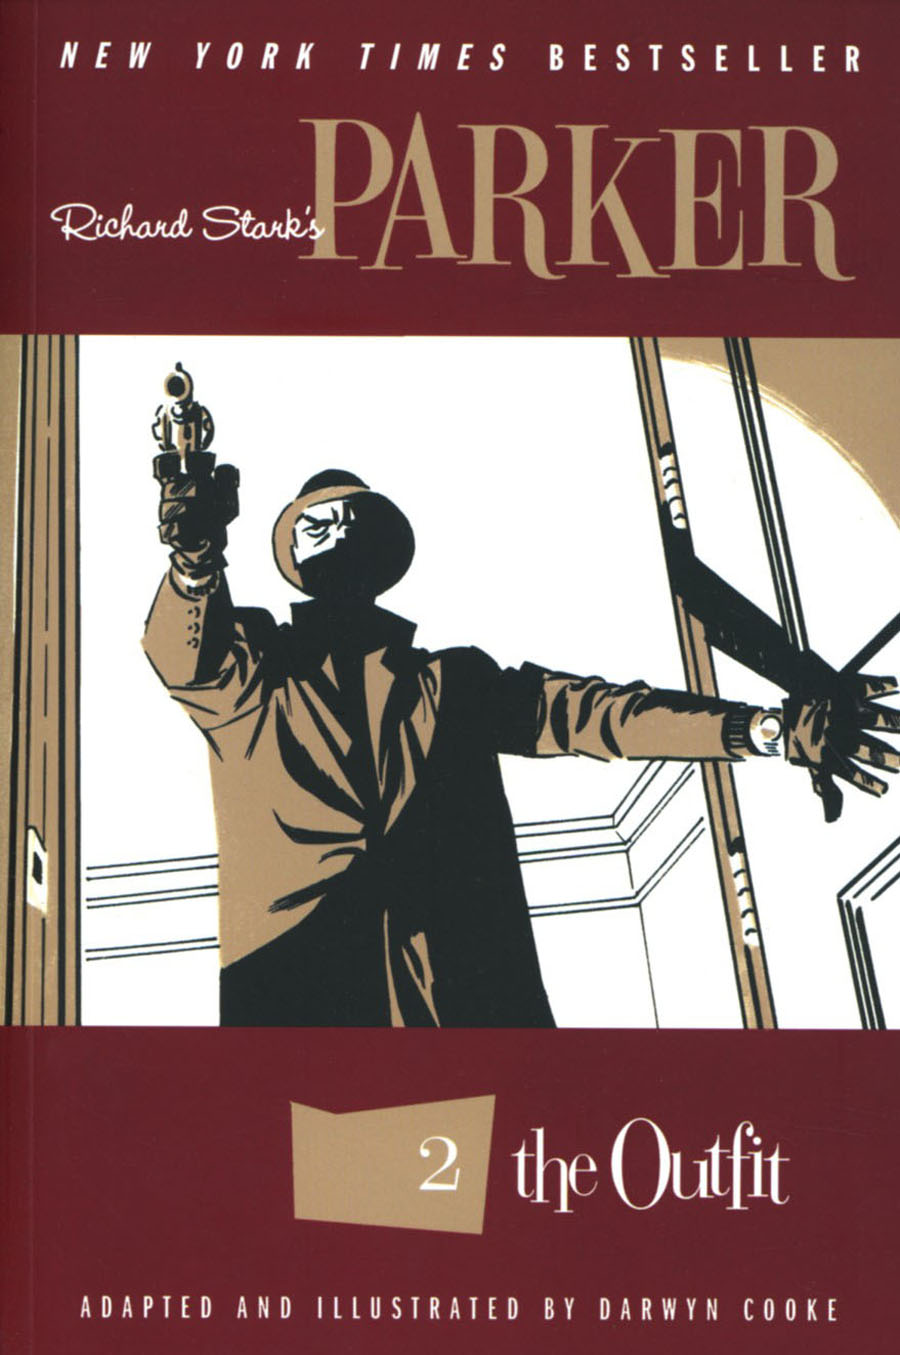 Richard Starks Parker Book 2 The Outfit TP